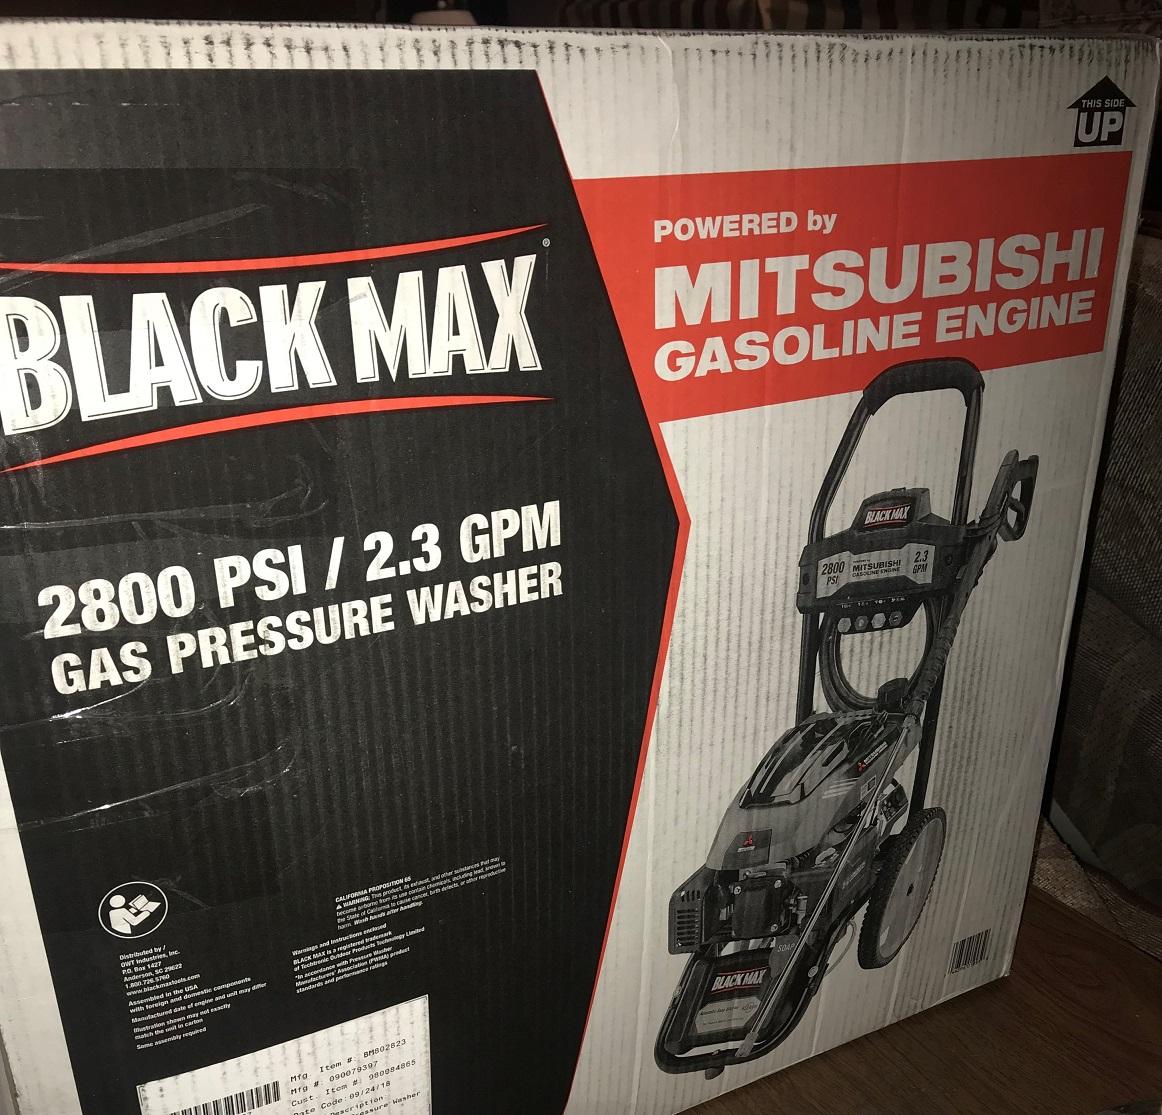 NEW IN BOX POWER WASHER BLACK MAX - POWER BY MITSUBISHI